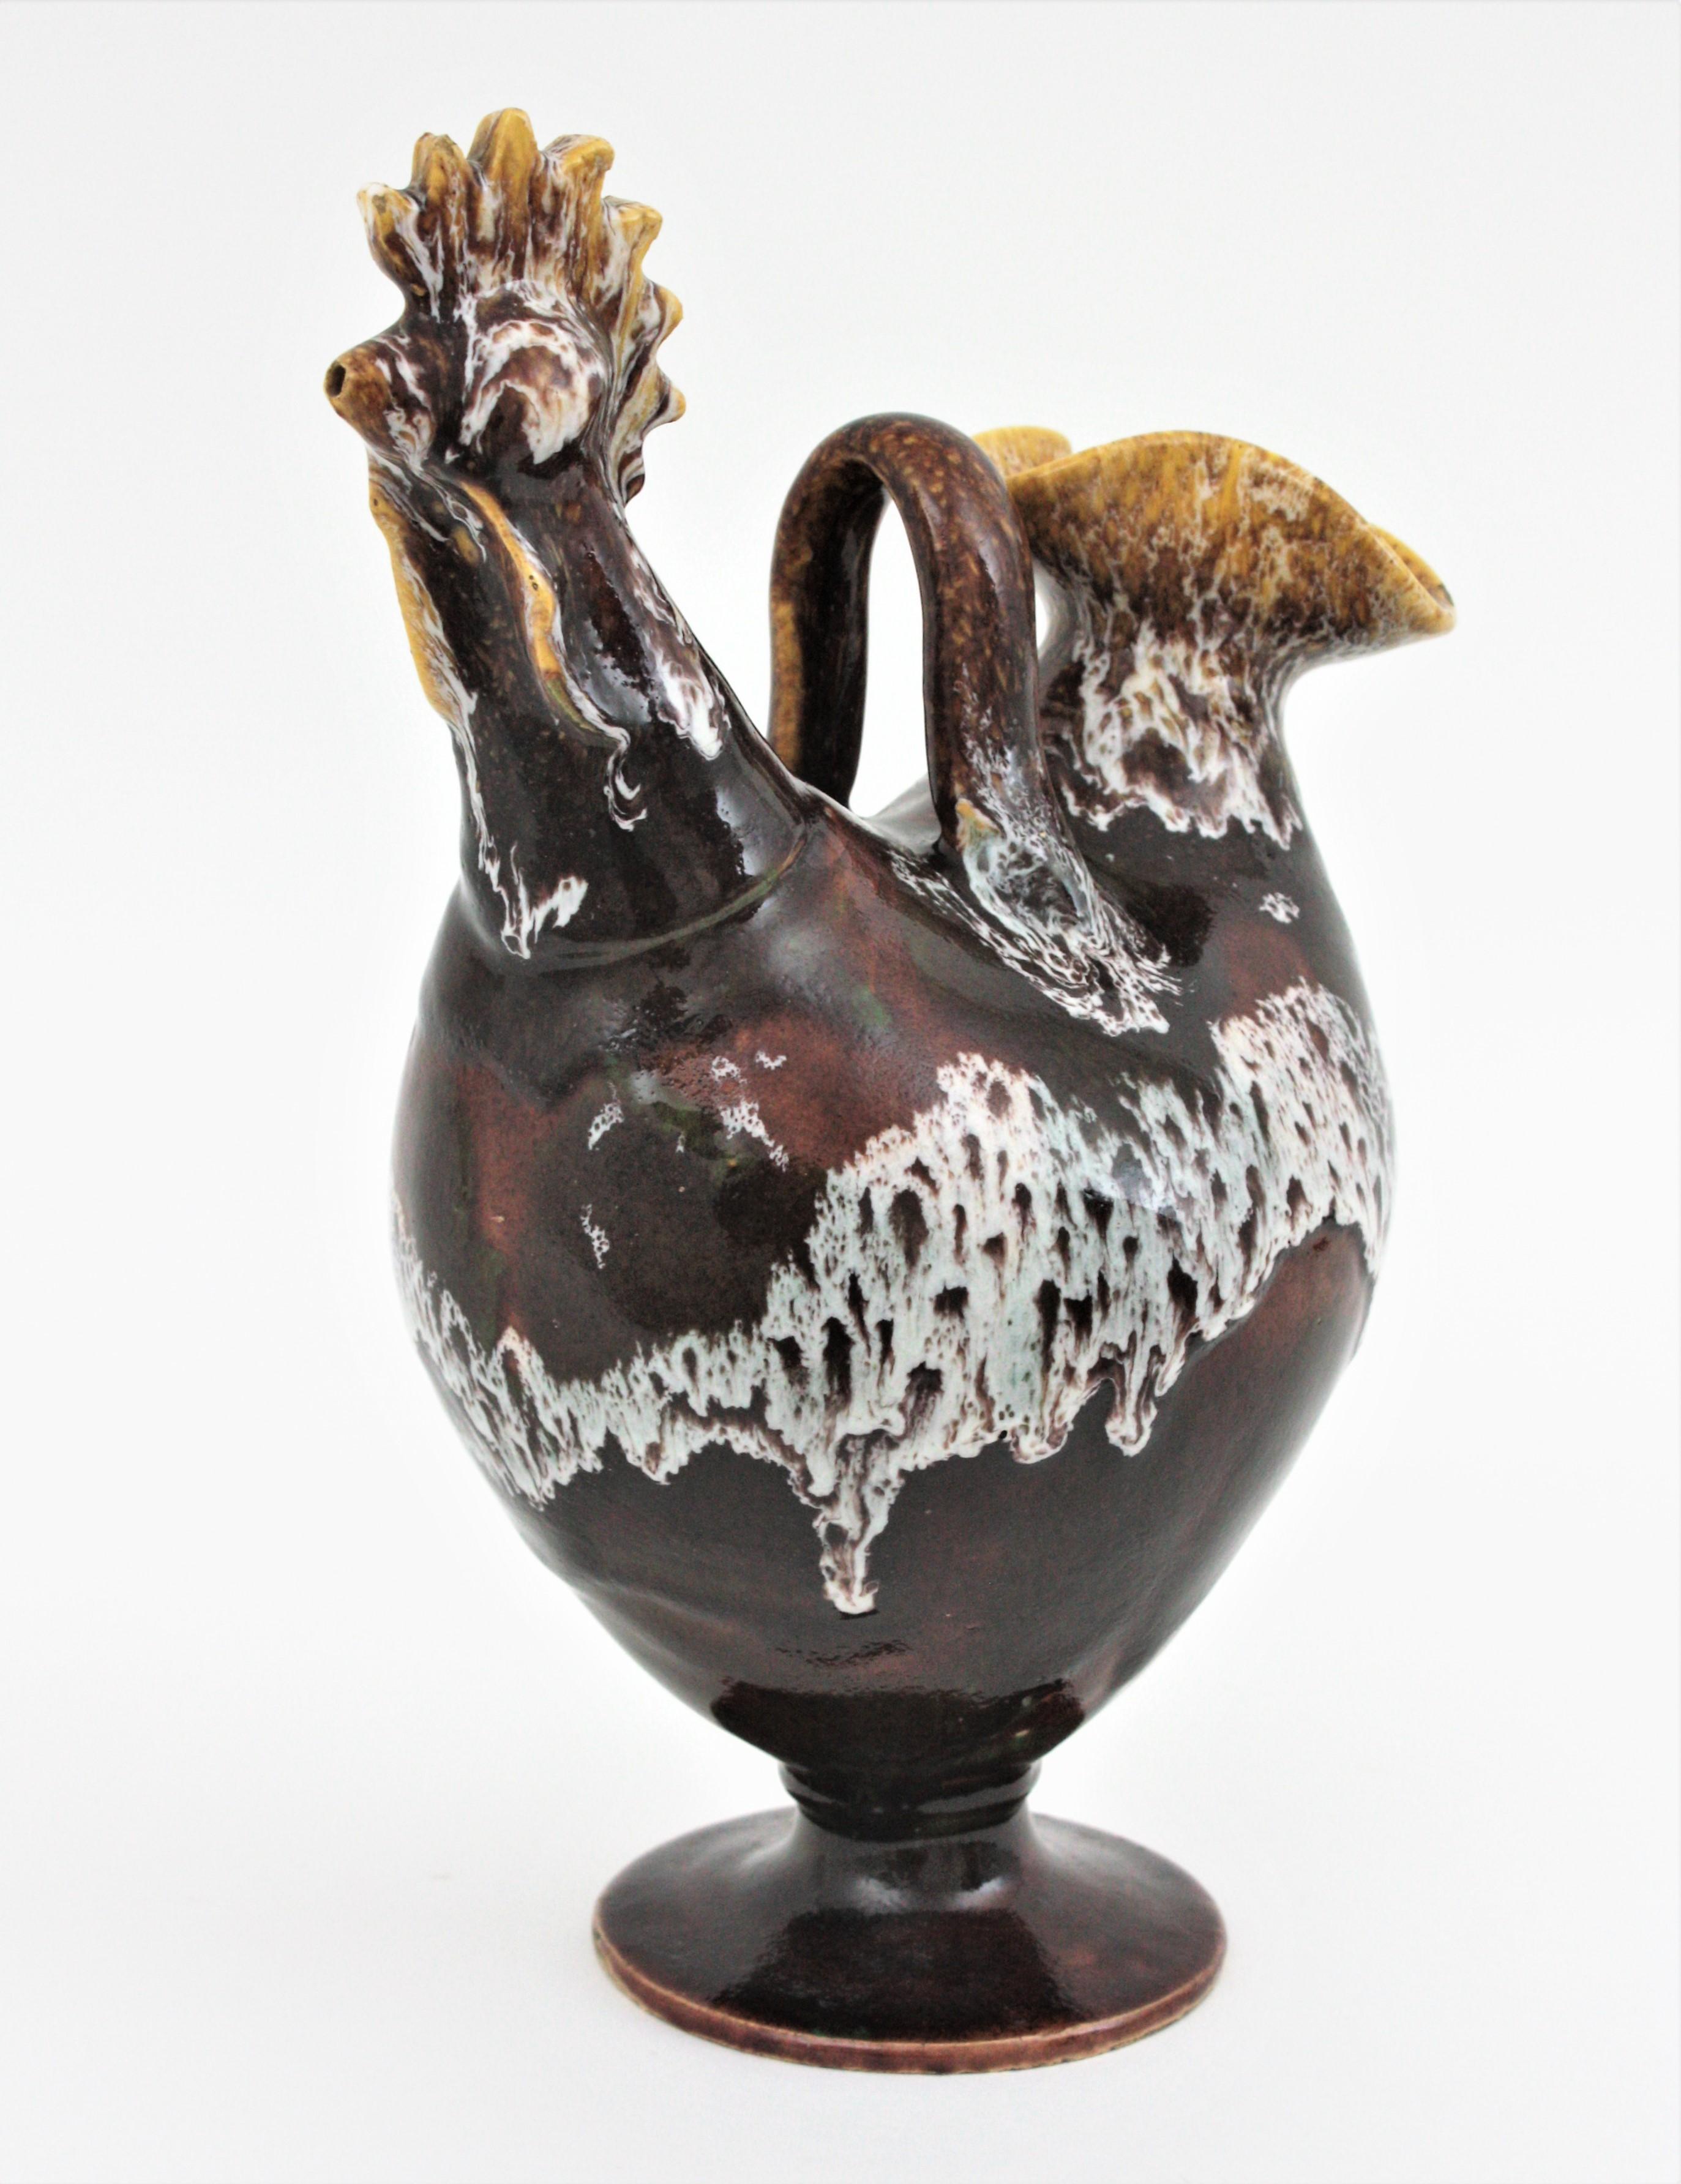 Spanish Rooster Shaped Pitcher in Brown Glazed Ceramic, 1960s For Sale 3